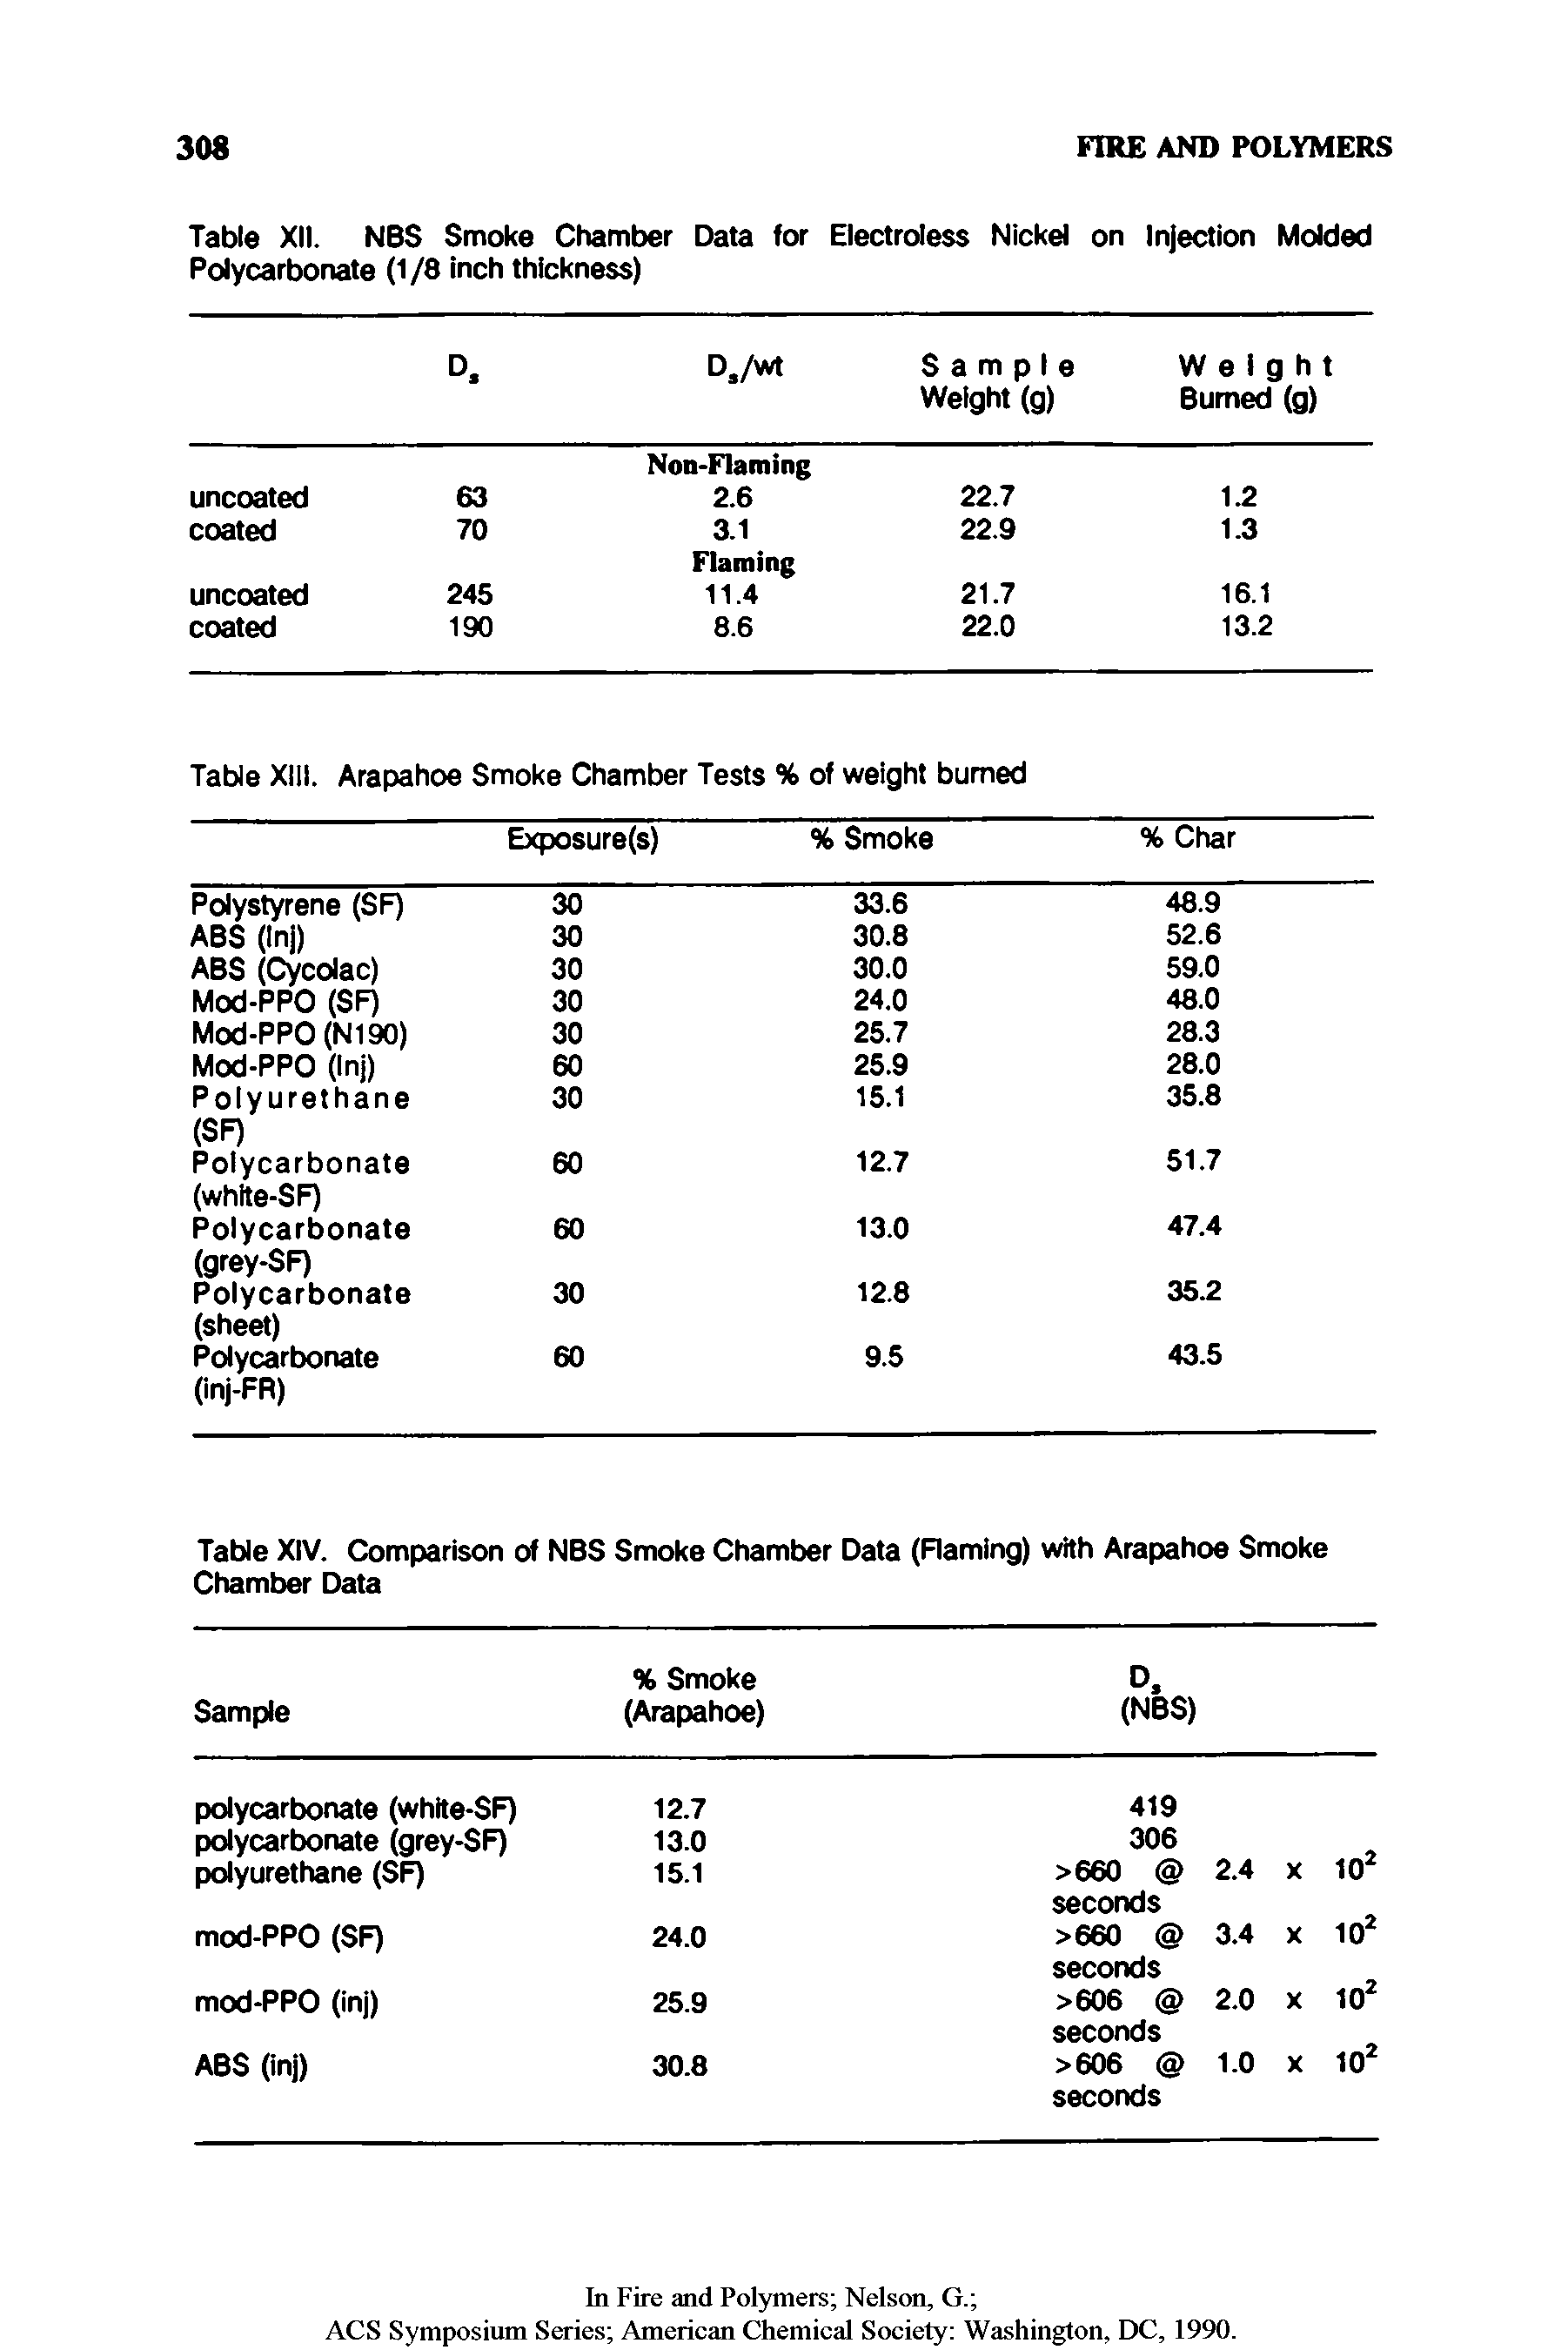 Table XIV. Comparison of NBS Smoke Chamber Data (Flaming) with Arapahoe Smoke ...